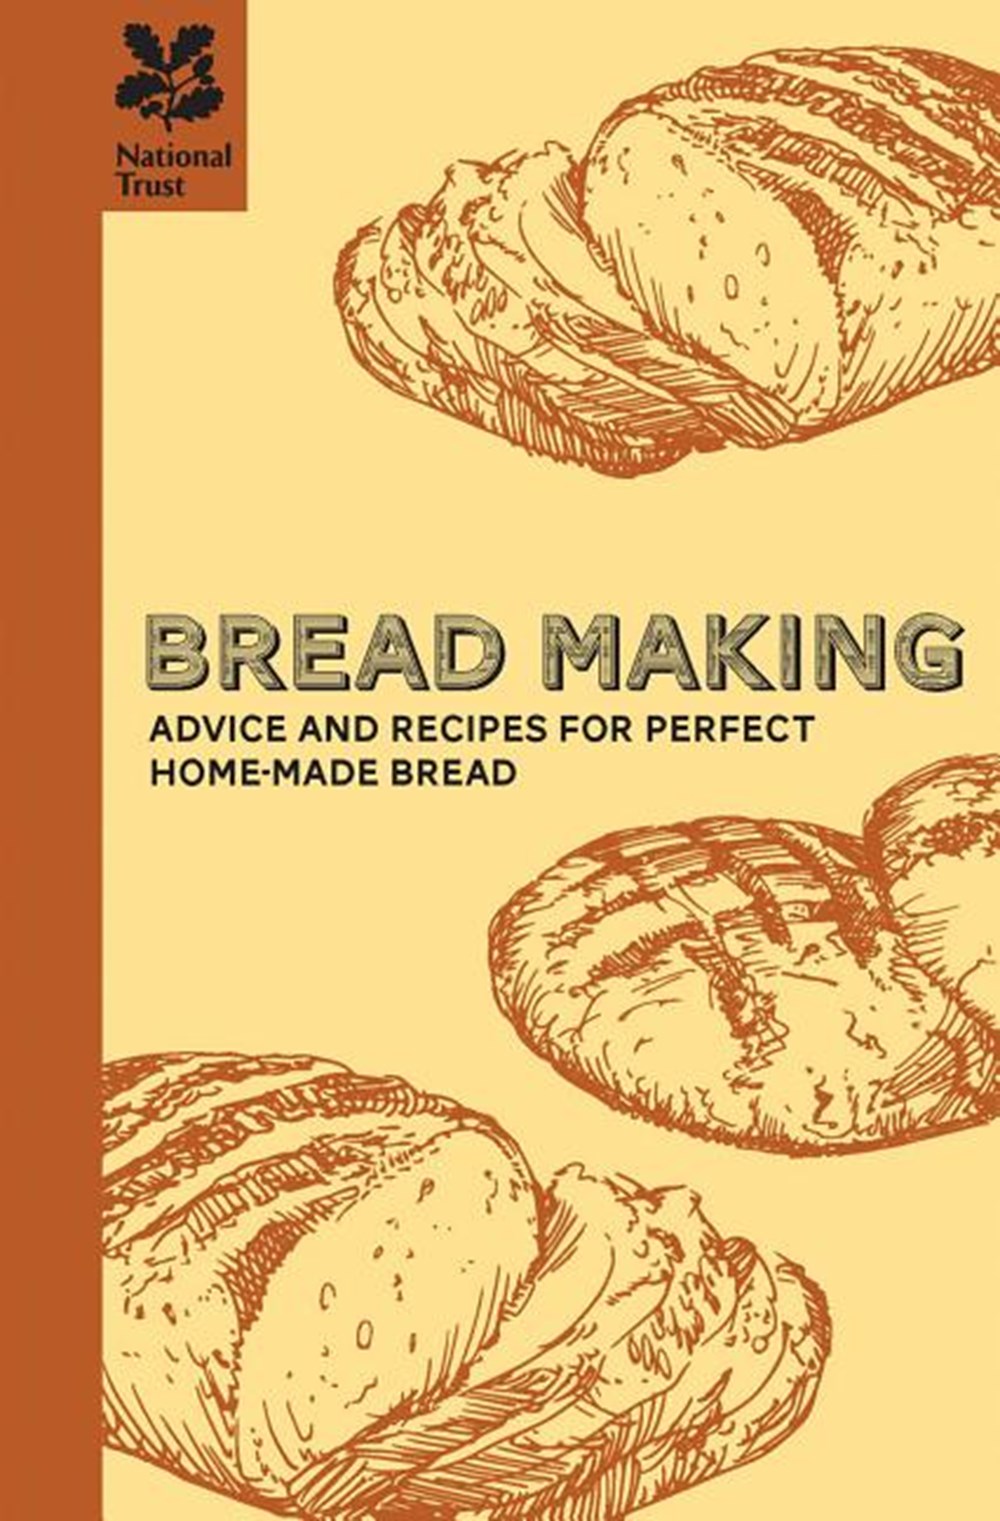 Bread Making: Advice and Recipes for Perfect Home-Made Bread